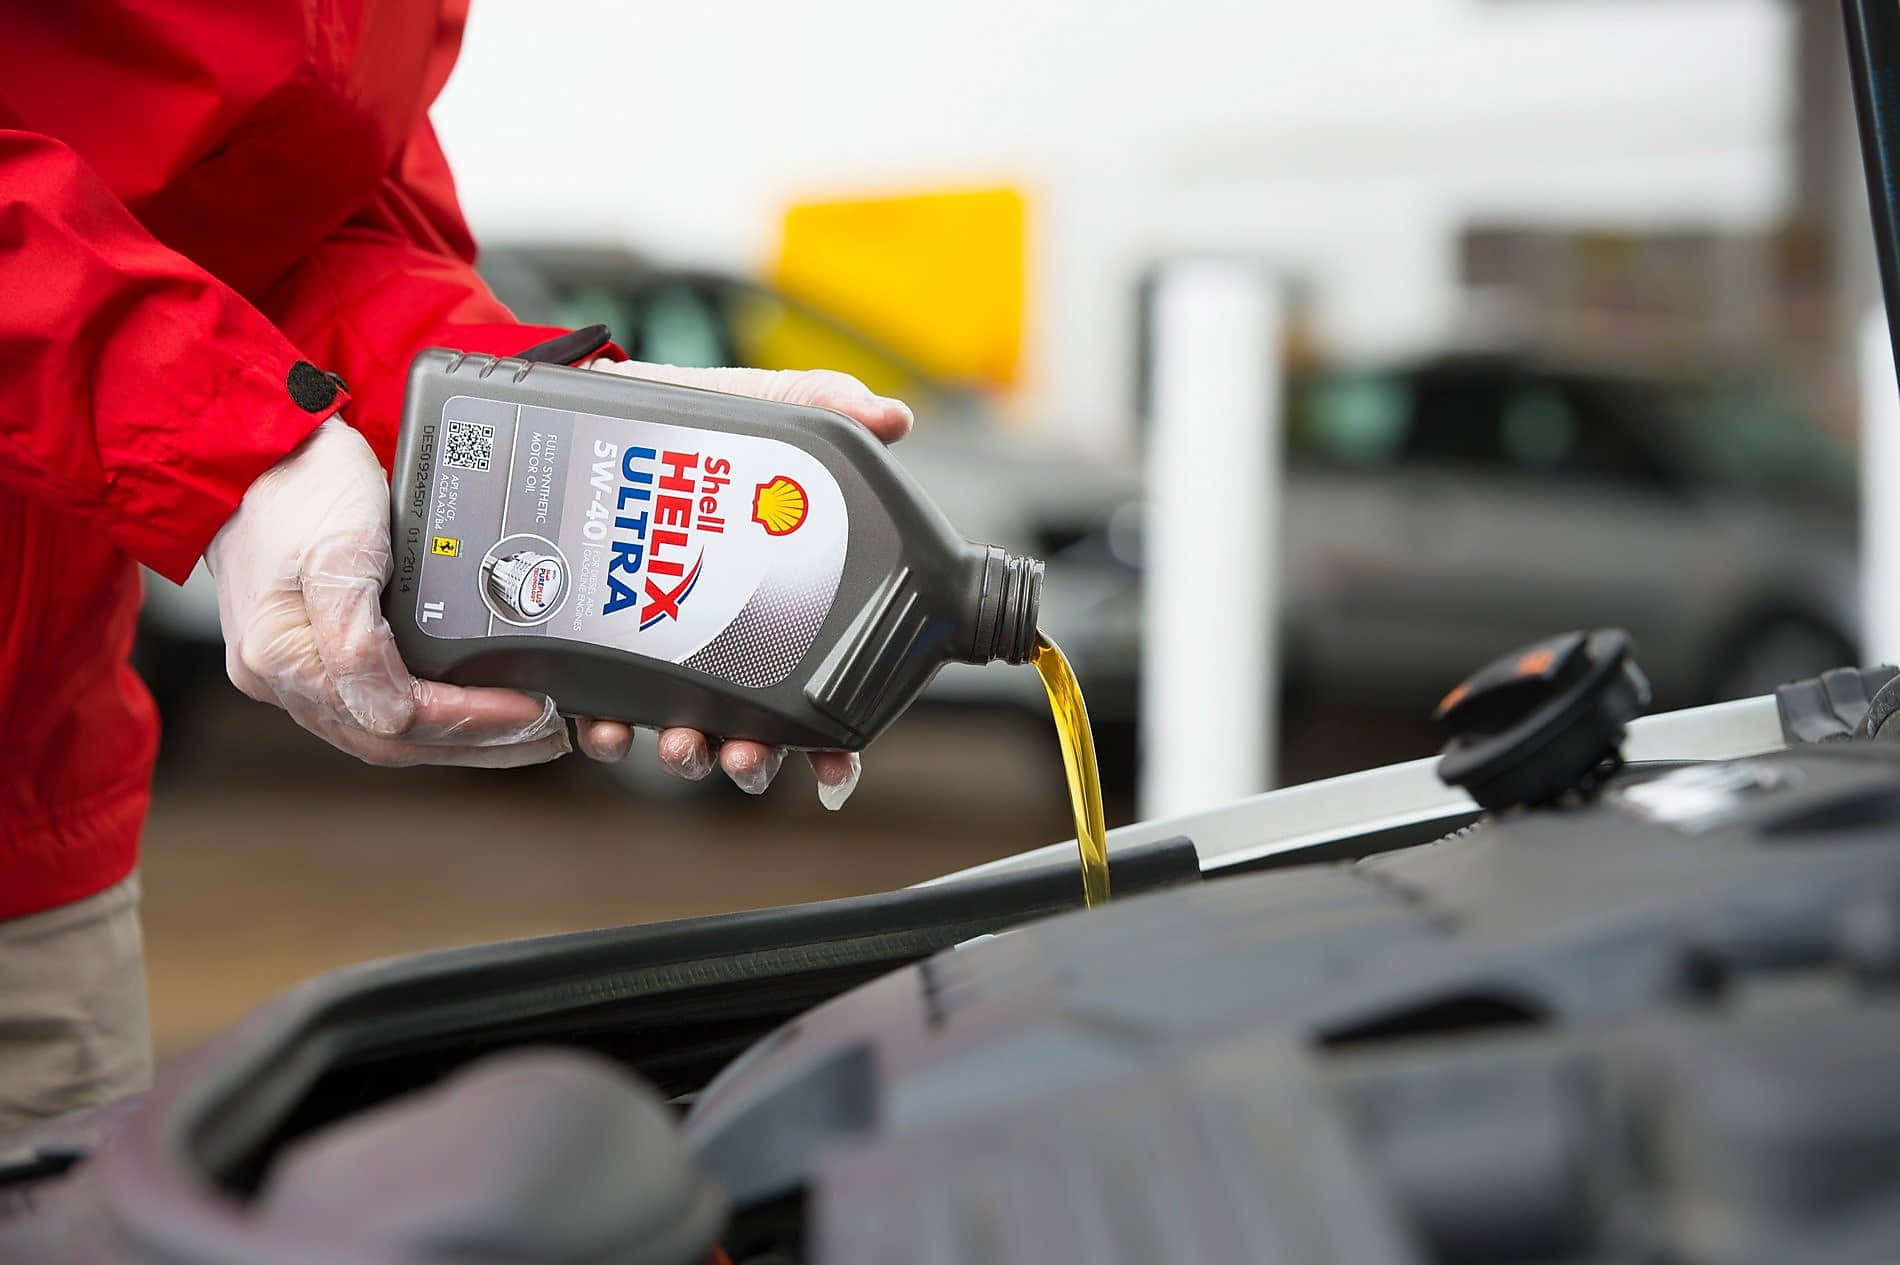 Keeping your engine running strong with superior oil